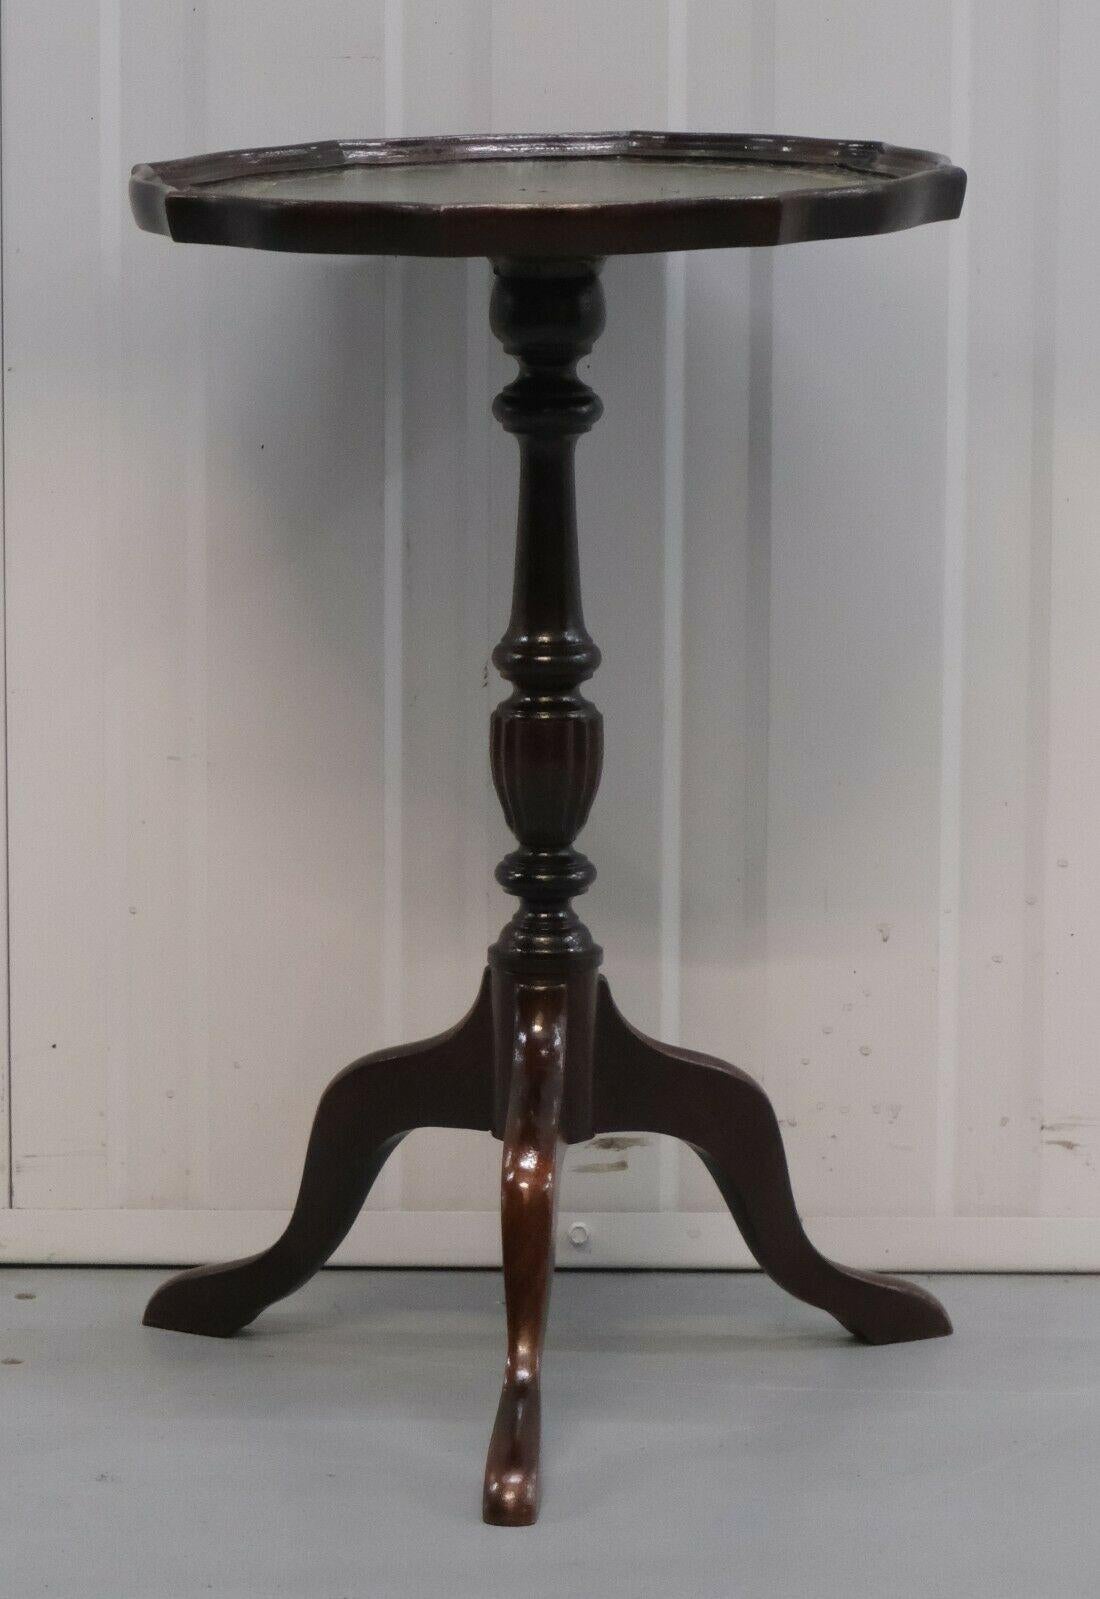 We are delighted to offer for sale this wonderful Bevan Funnell side /top lamp table in Mahogany finish with gold leaf tooling and green leather top.

This stunning table is very well made with tripod legs which makes it very functional for any